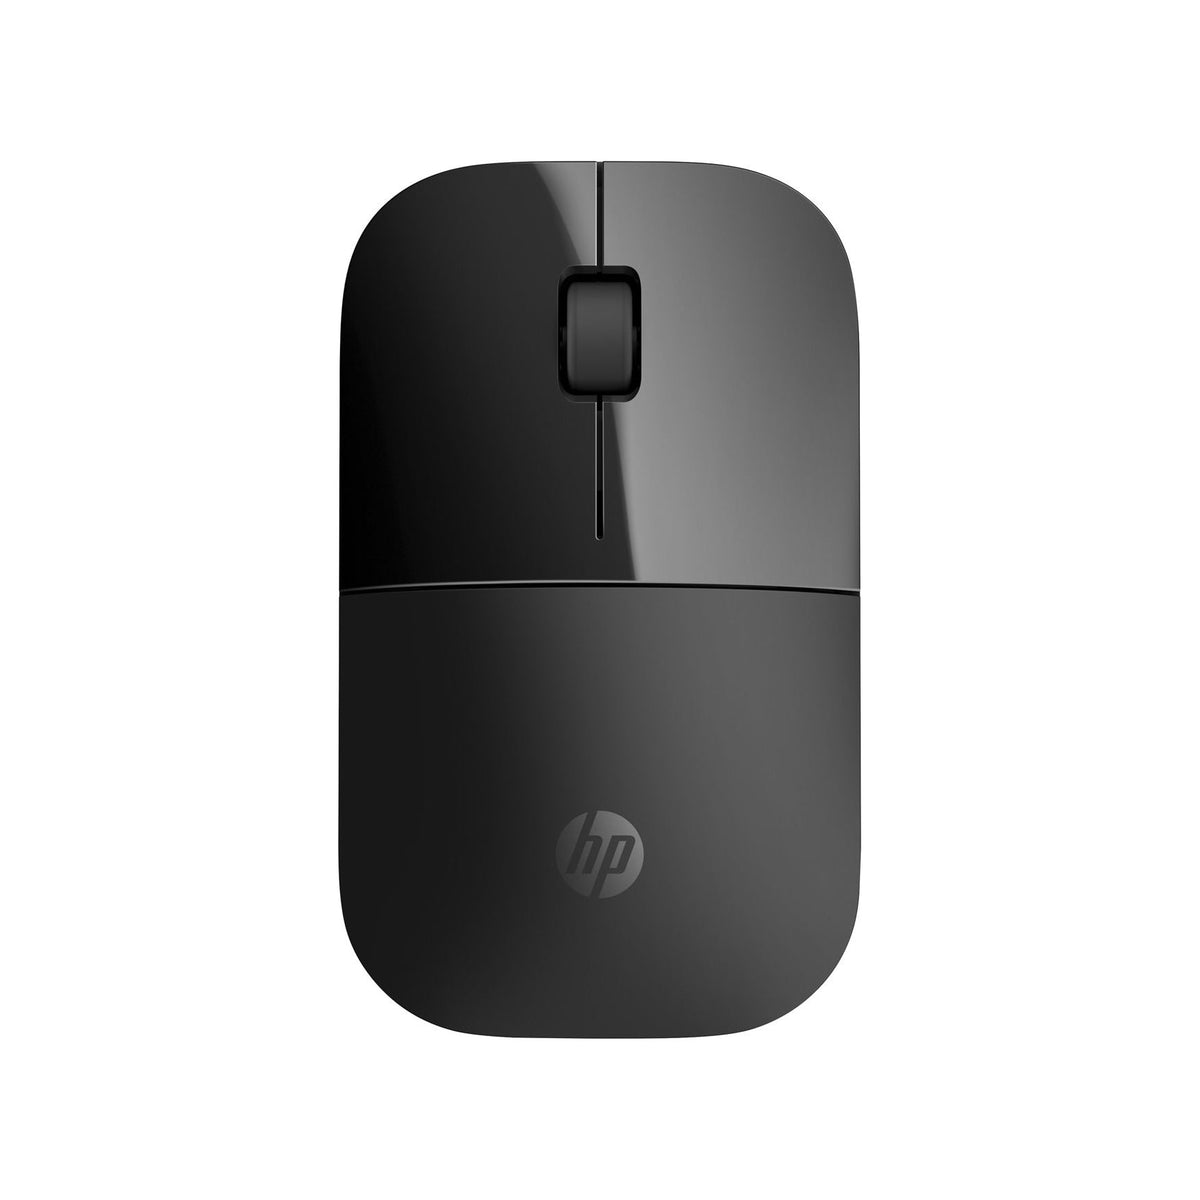 HP Z3700 Wireless Mouse - Black Onyx | V0L79AA#ABB from HP - DID Electrical